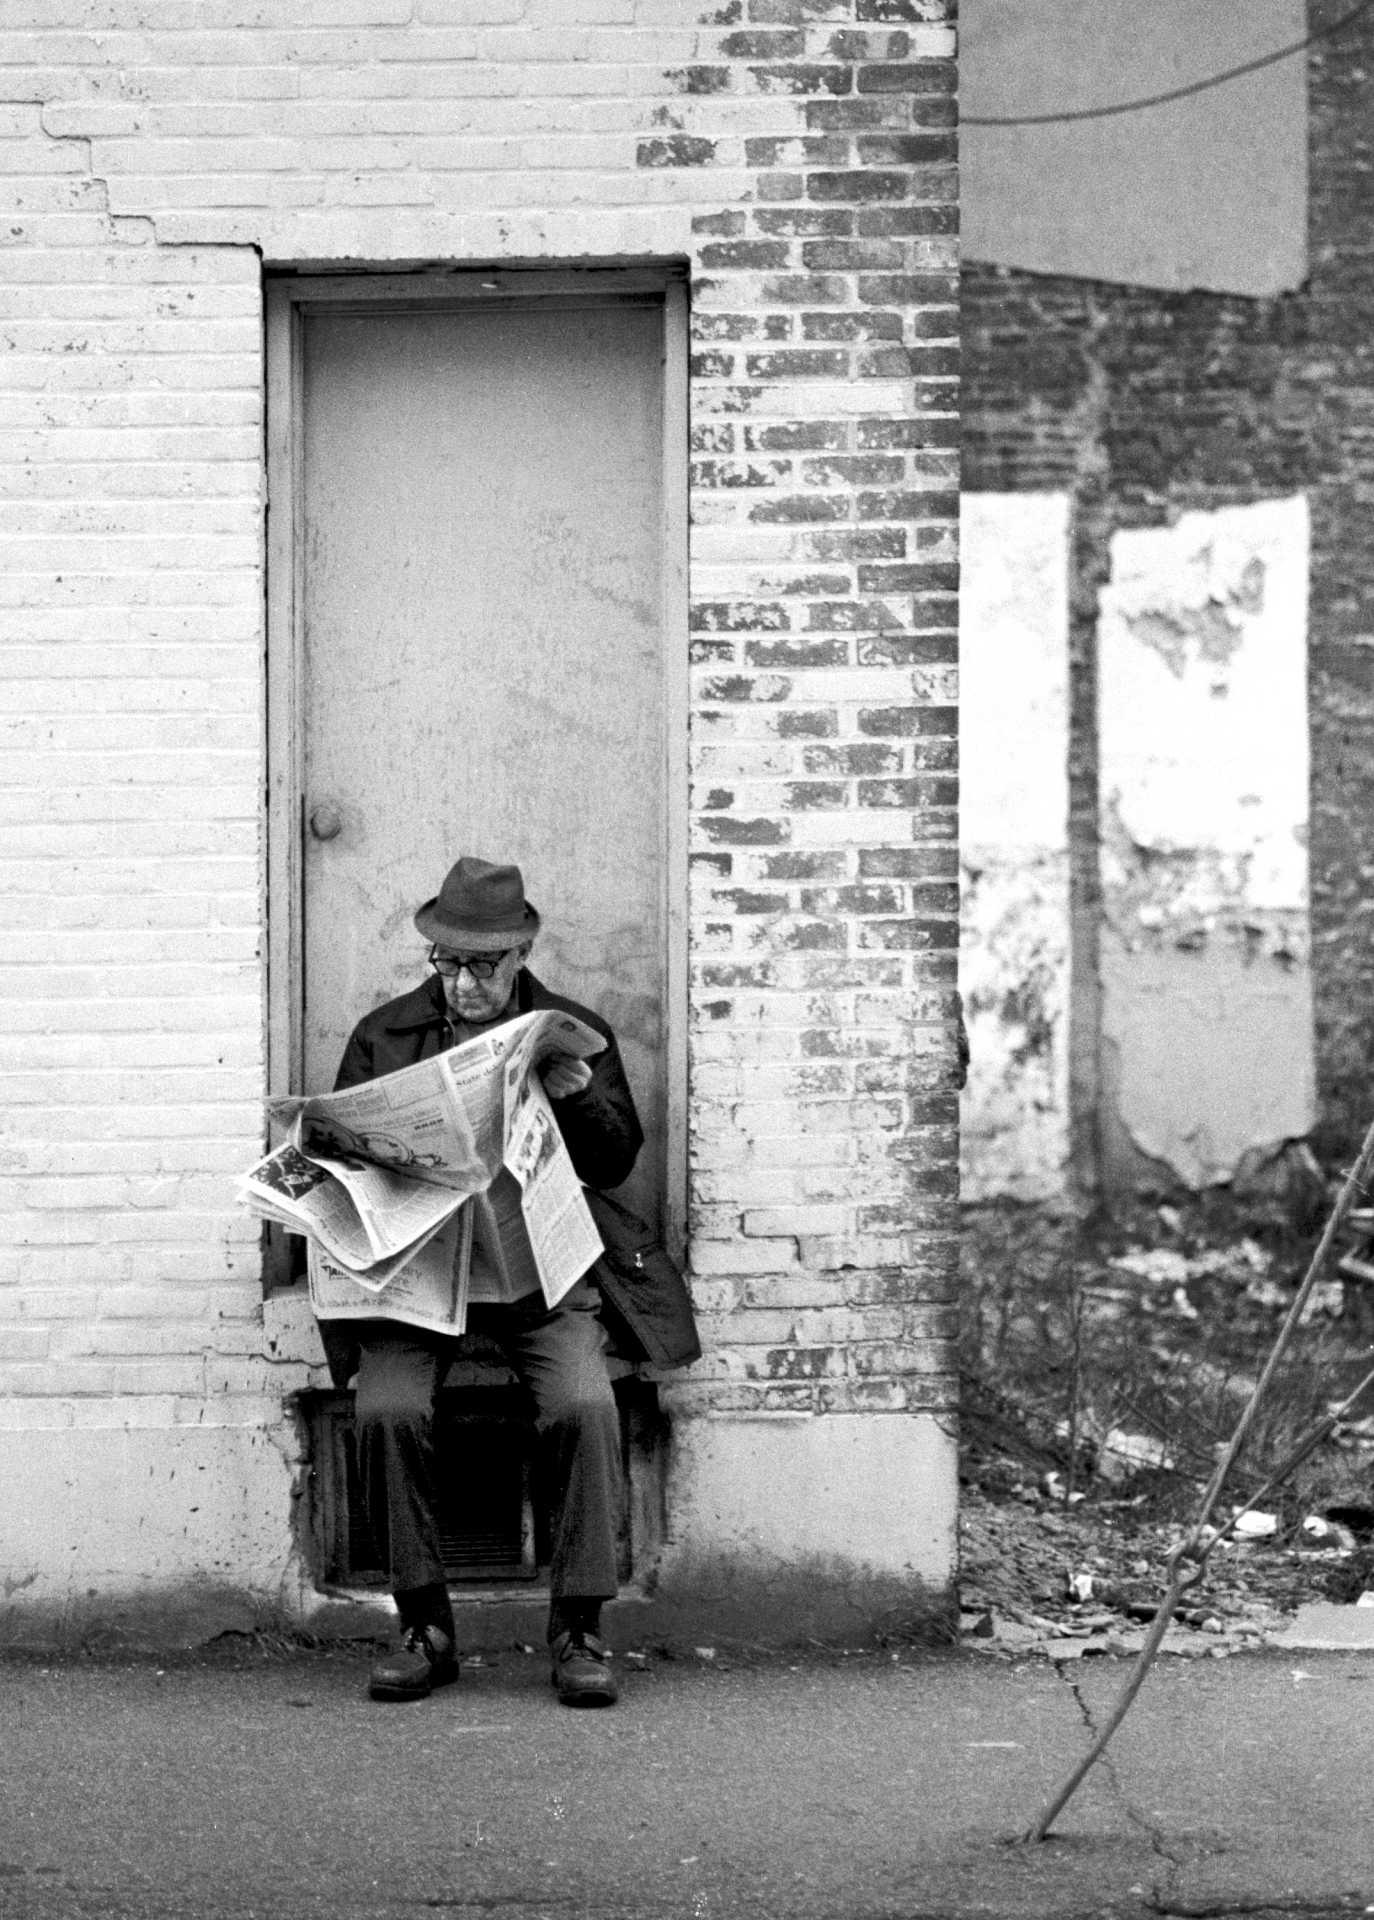 A man catches up on the news in downtown Danbury.  1970’s